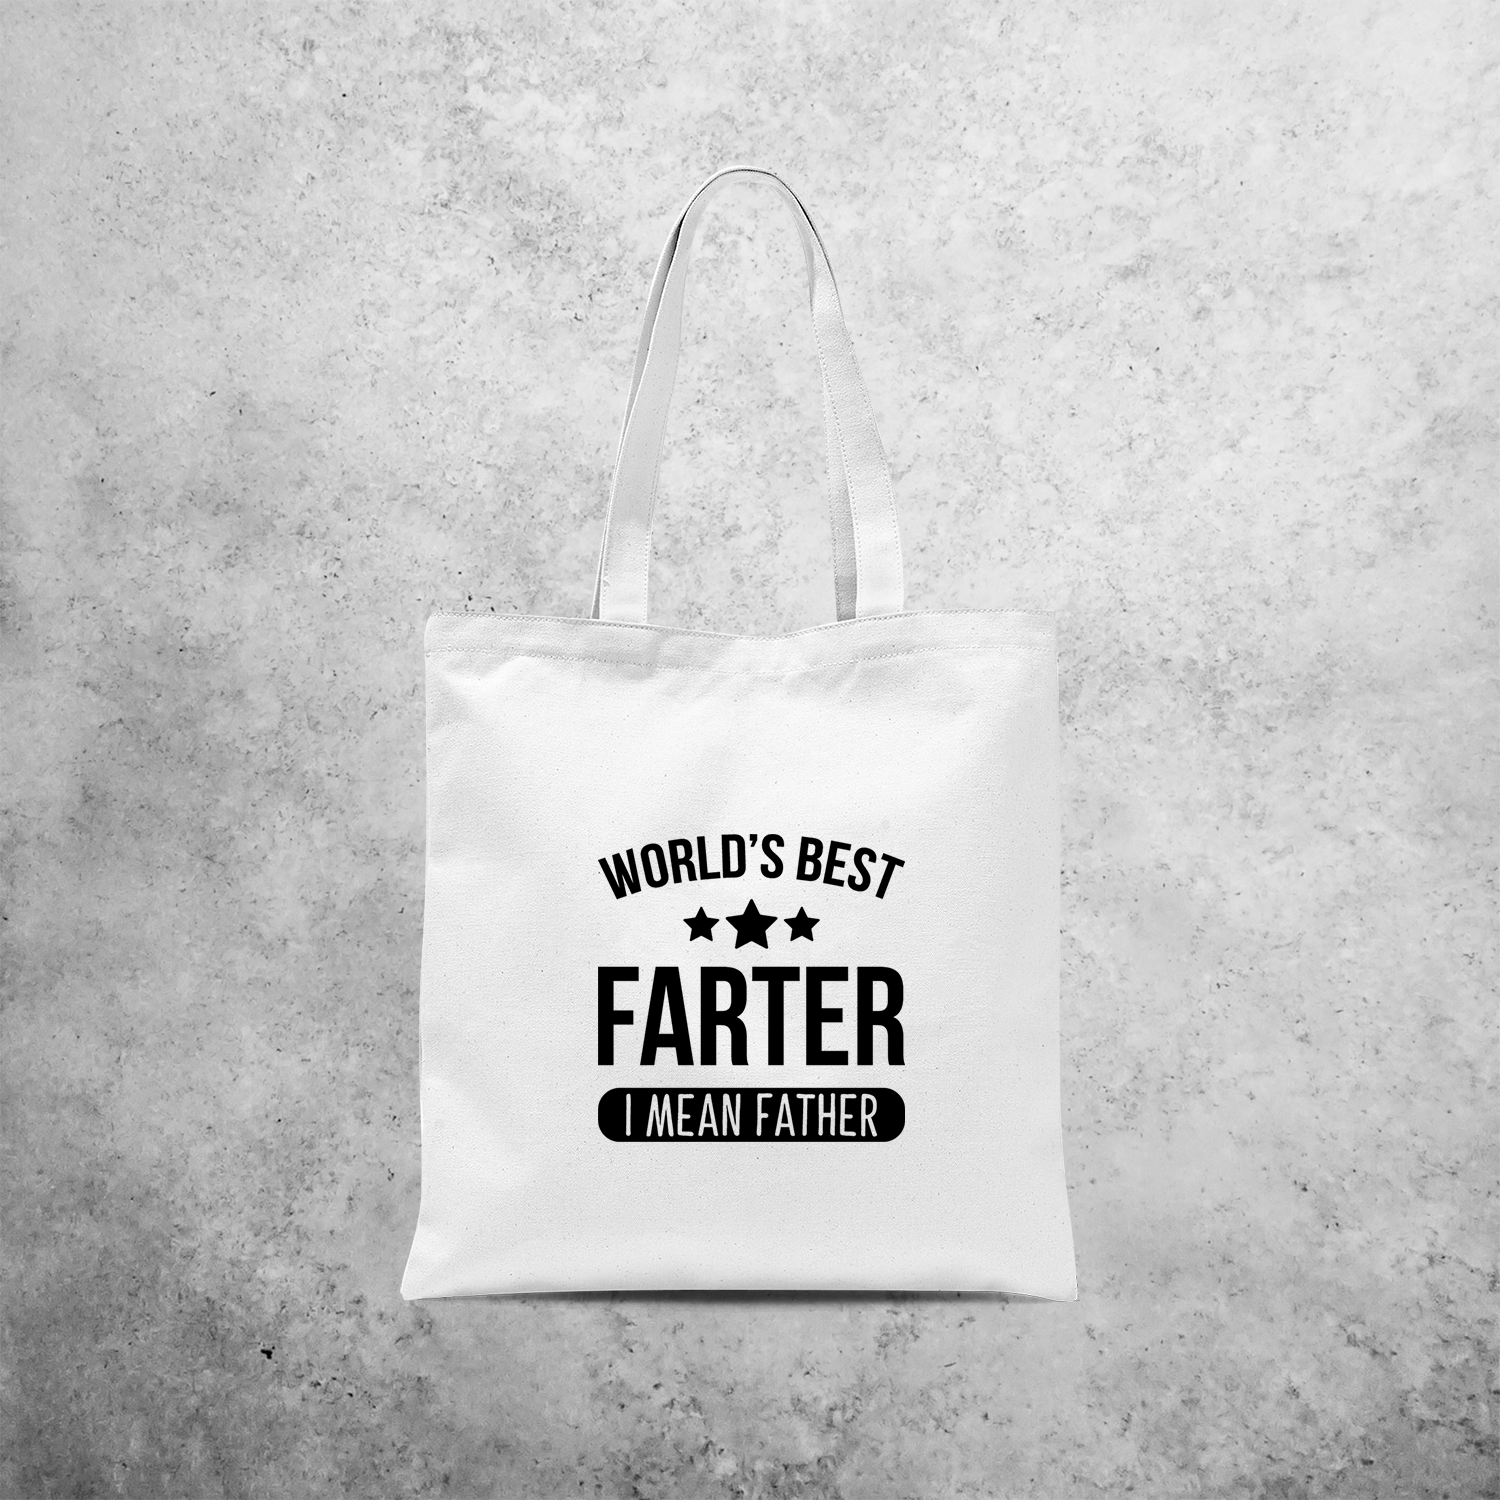 'World's best farter - I mean father' tote bag